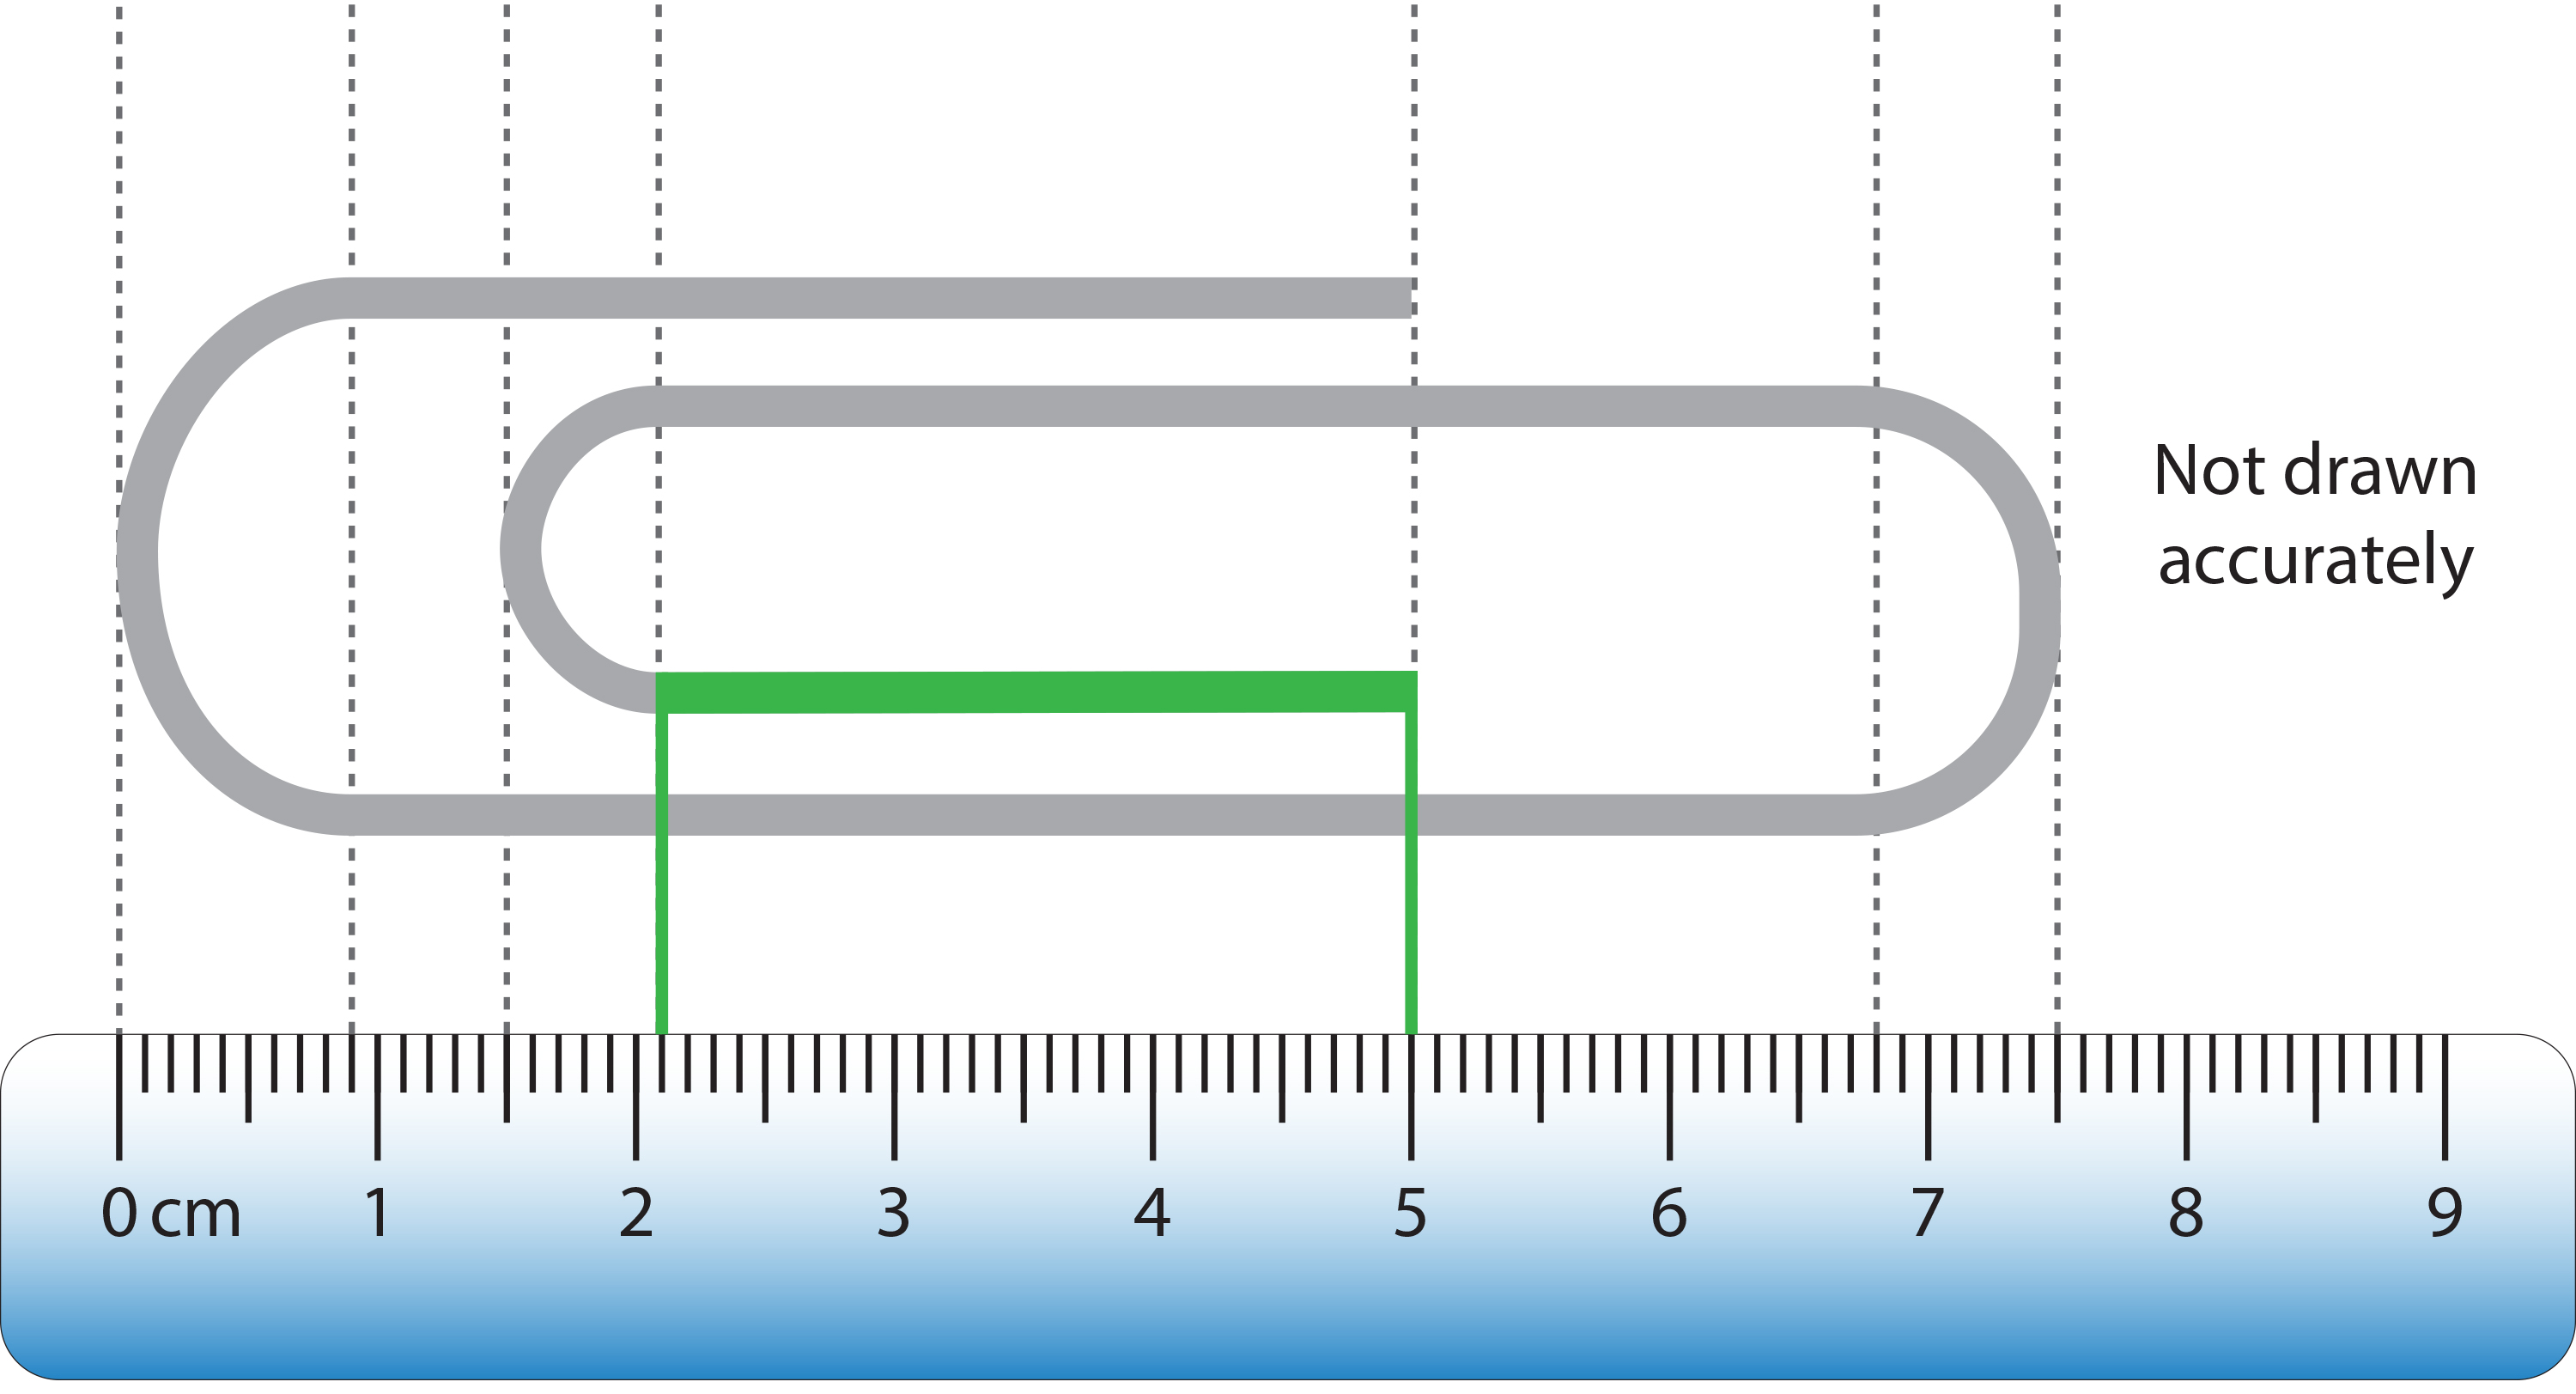 The green line measures 2.9cm